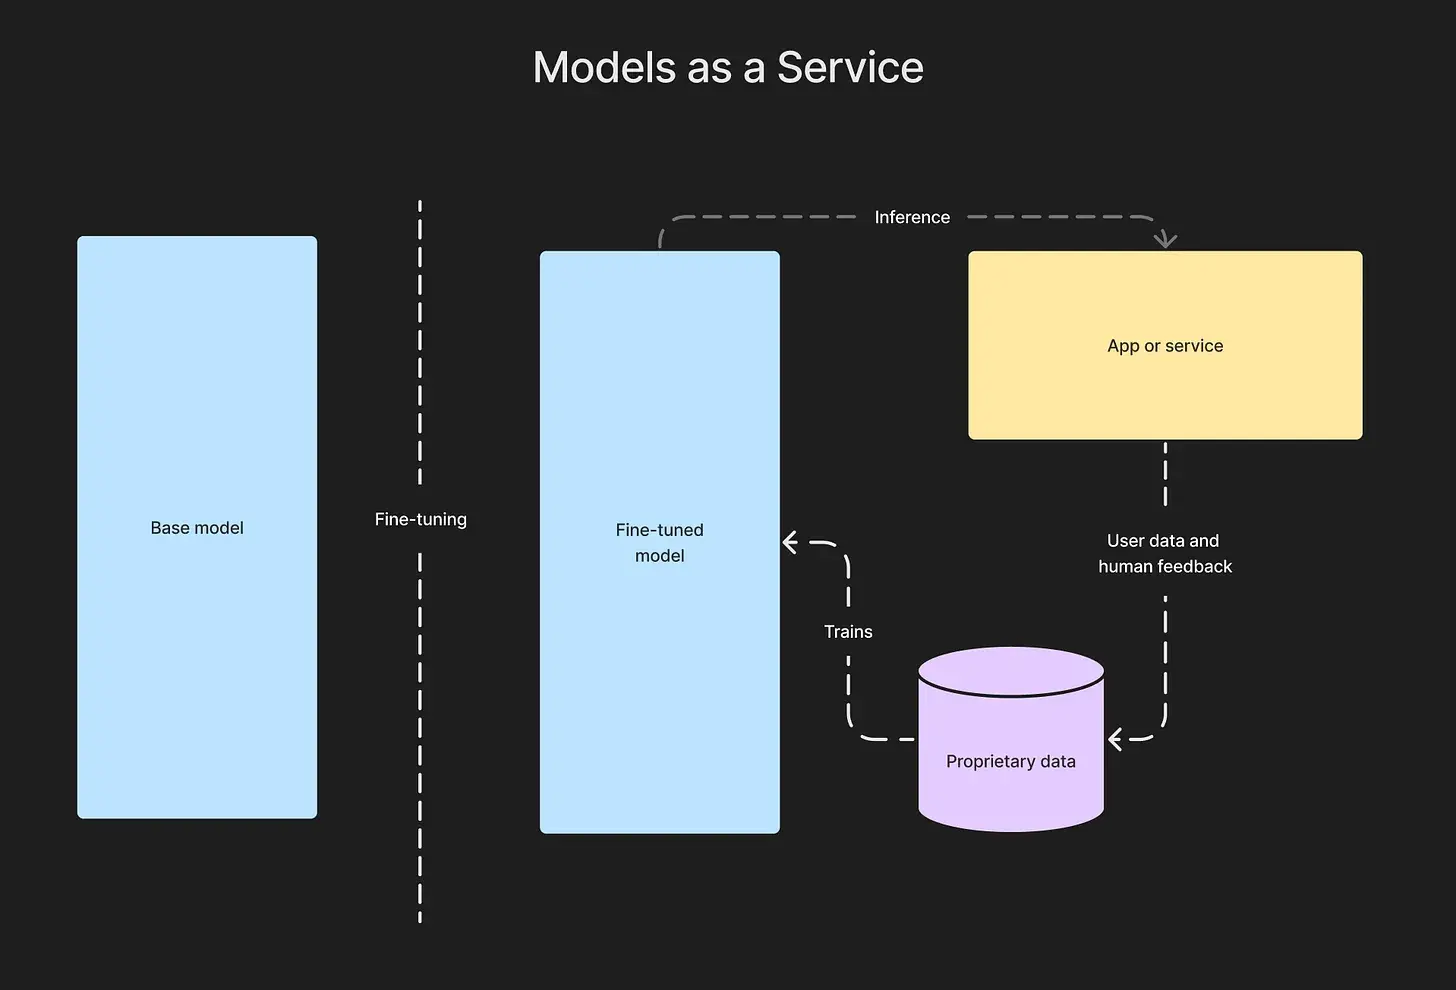 Models as a service architecture